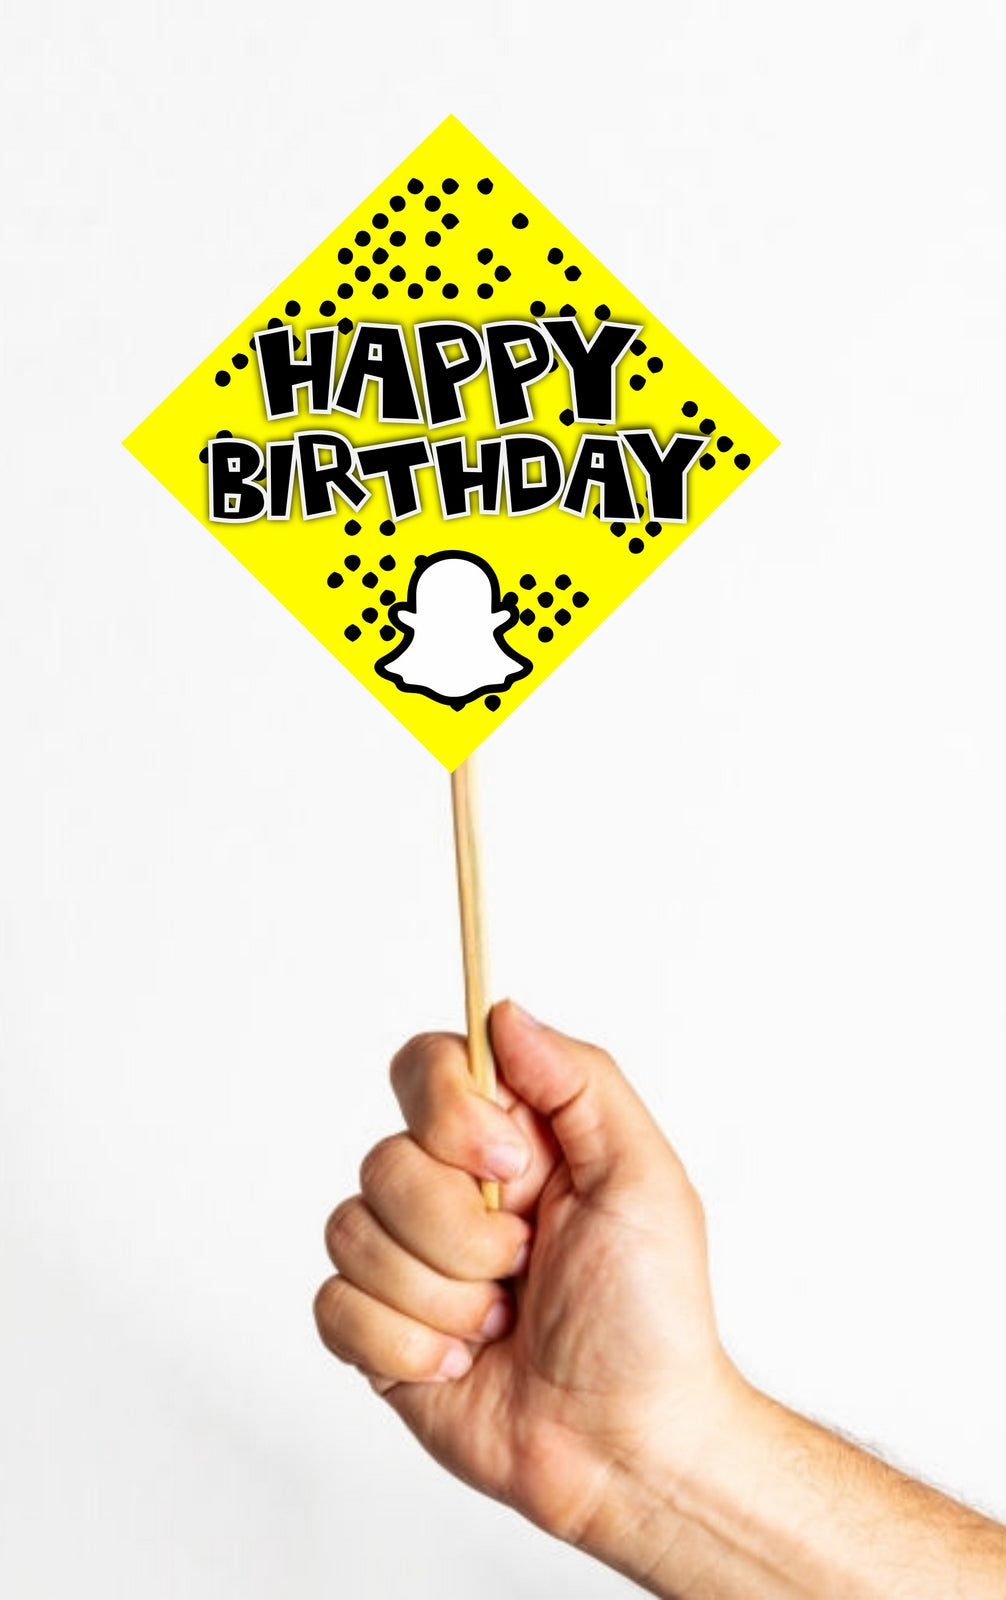 Snapchat Theme Birthday Photo Booth Party Props Theme Birthday Party Decoration, Birthday Photo Booth Party Item for Adults and Kids